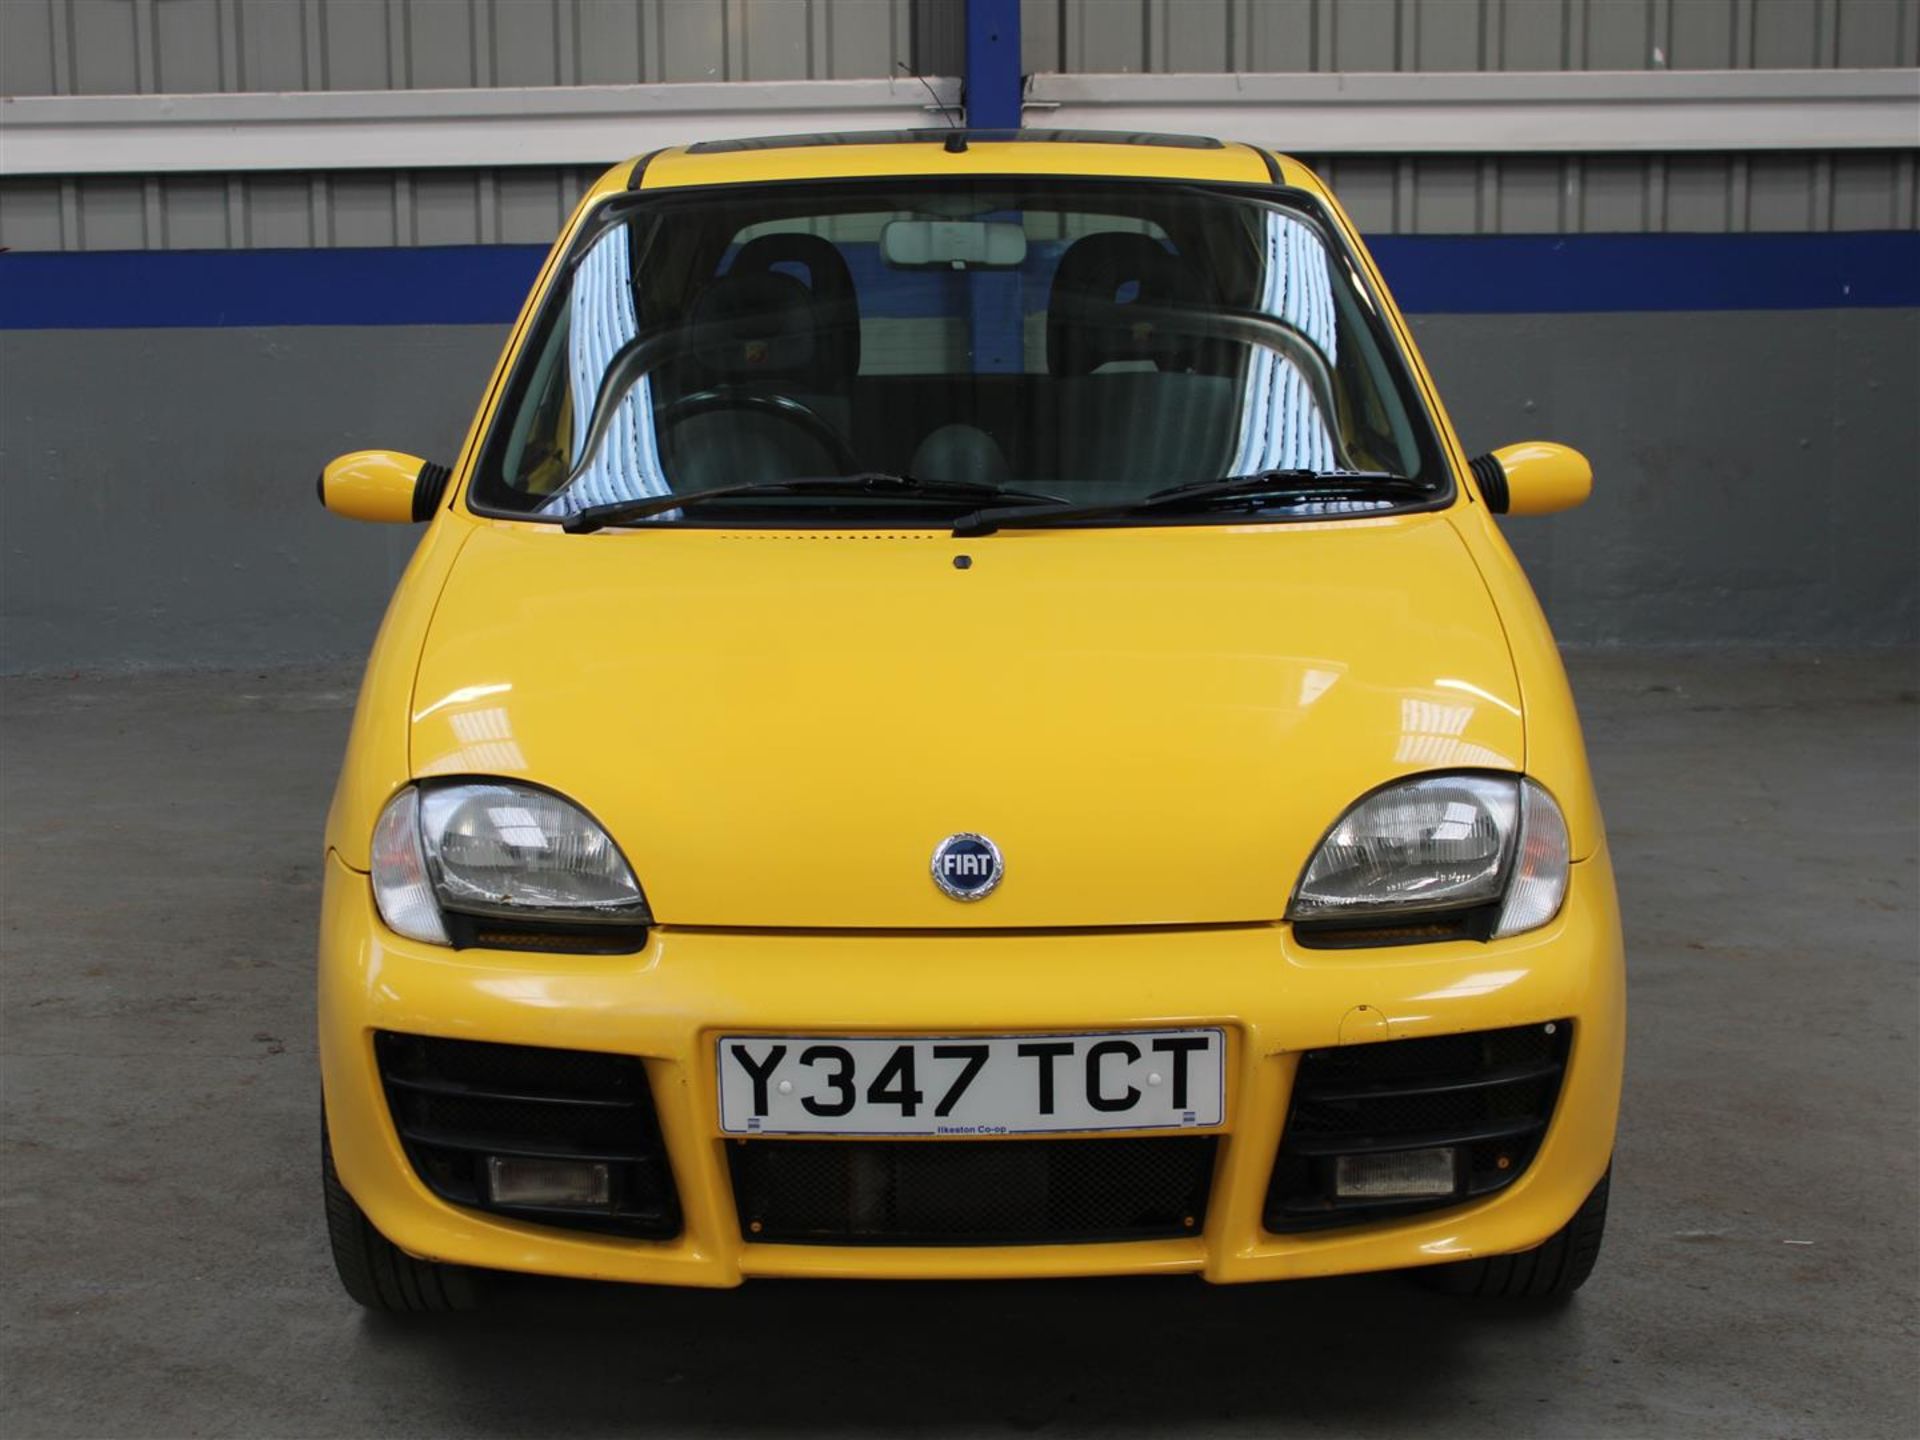 2001 Fiat Seicento Sporting - Image 2 of 20